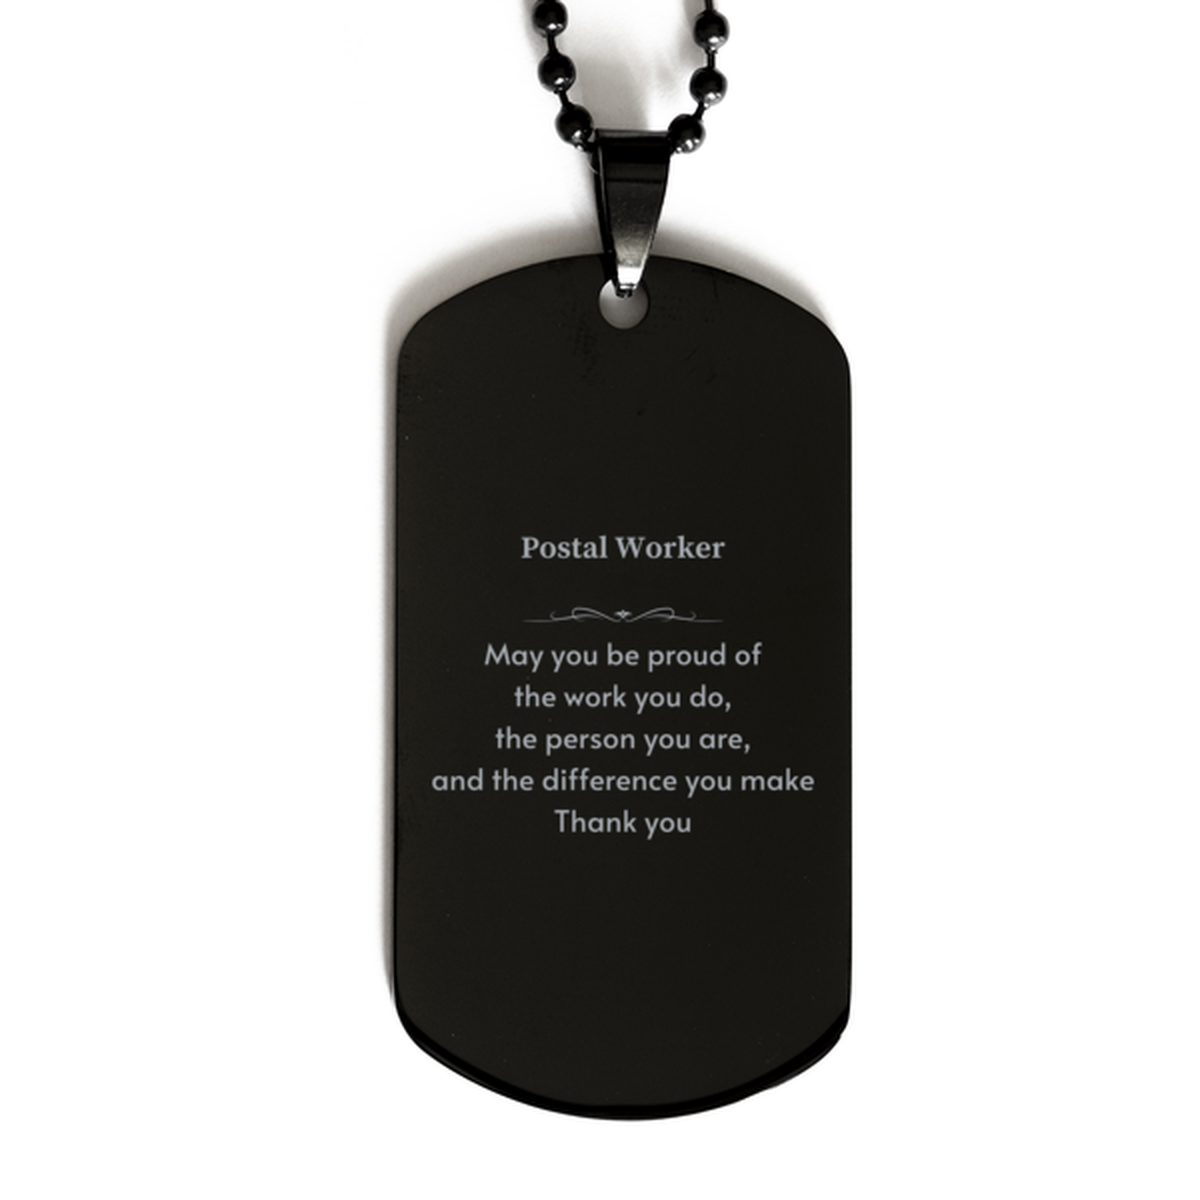 Heartwarming Black Dog Tag Retirement Coworkers Gifts for Postal Worker, Postal Worker May You be proud of the work you do, the person you are Gifts for Boss Men Women Friends